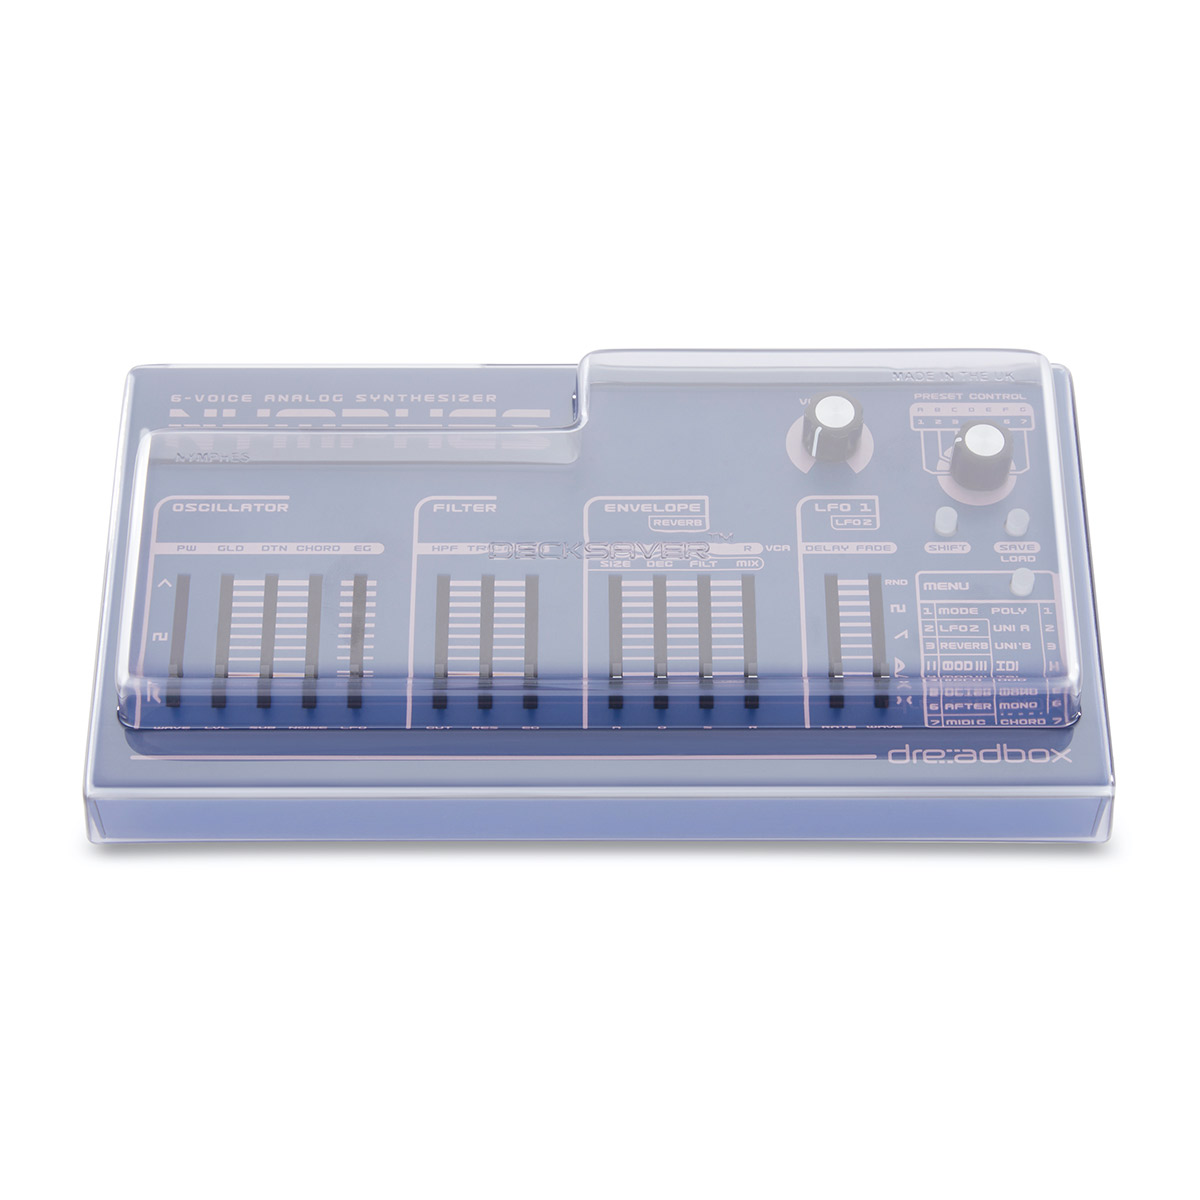 DECKSAVER deck saver [ Dreadbox Nymphes] for machinery protective cover DS-PC-NYMPHES